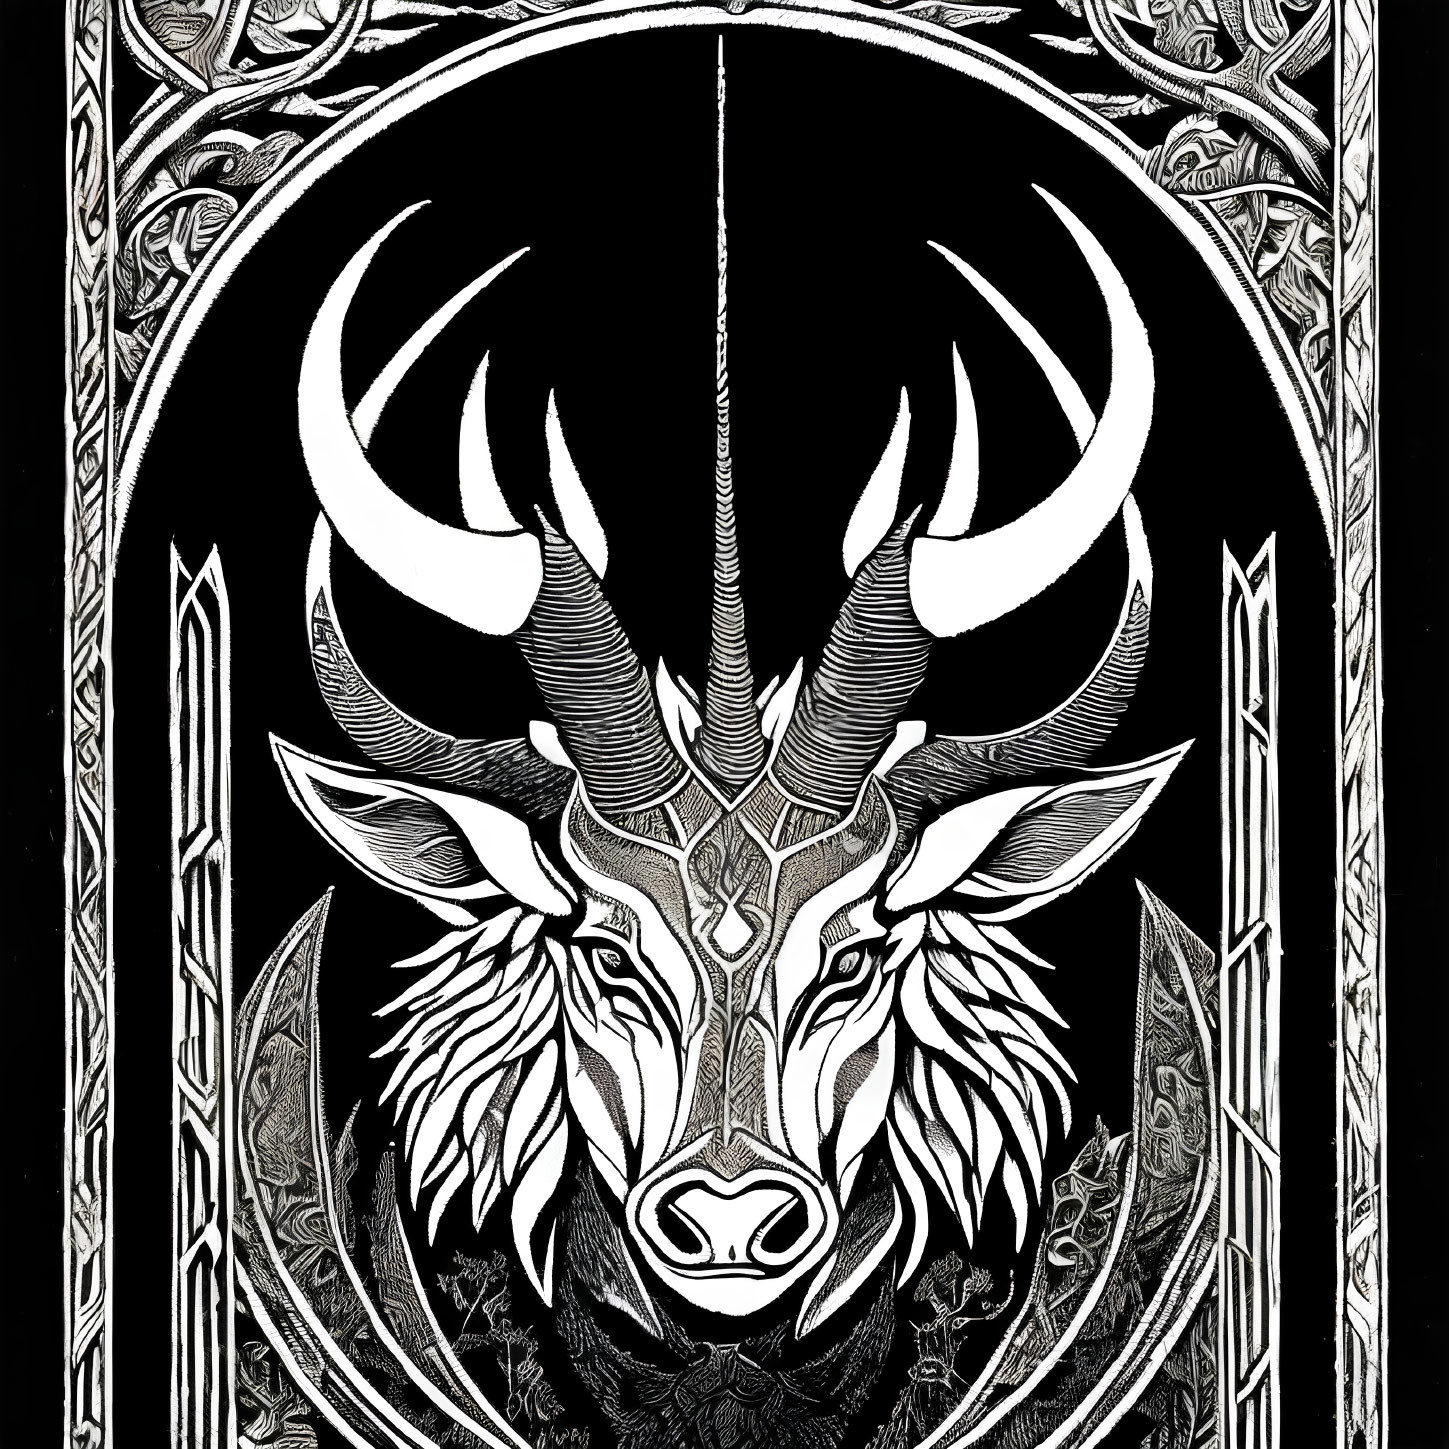 Symmetric ornate stag with Celtic-style background illustration